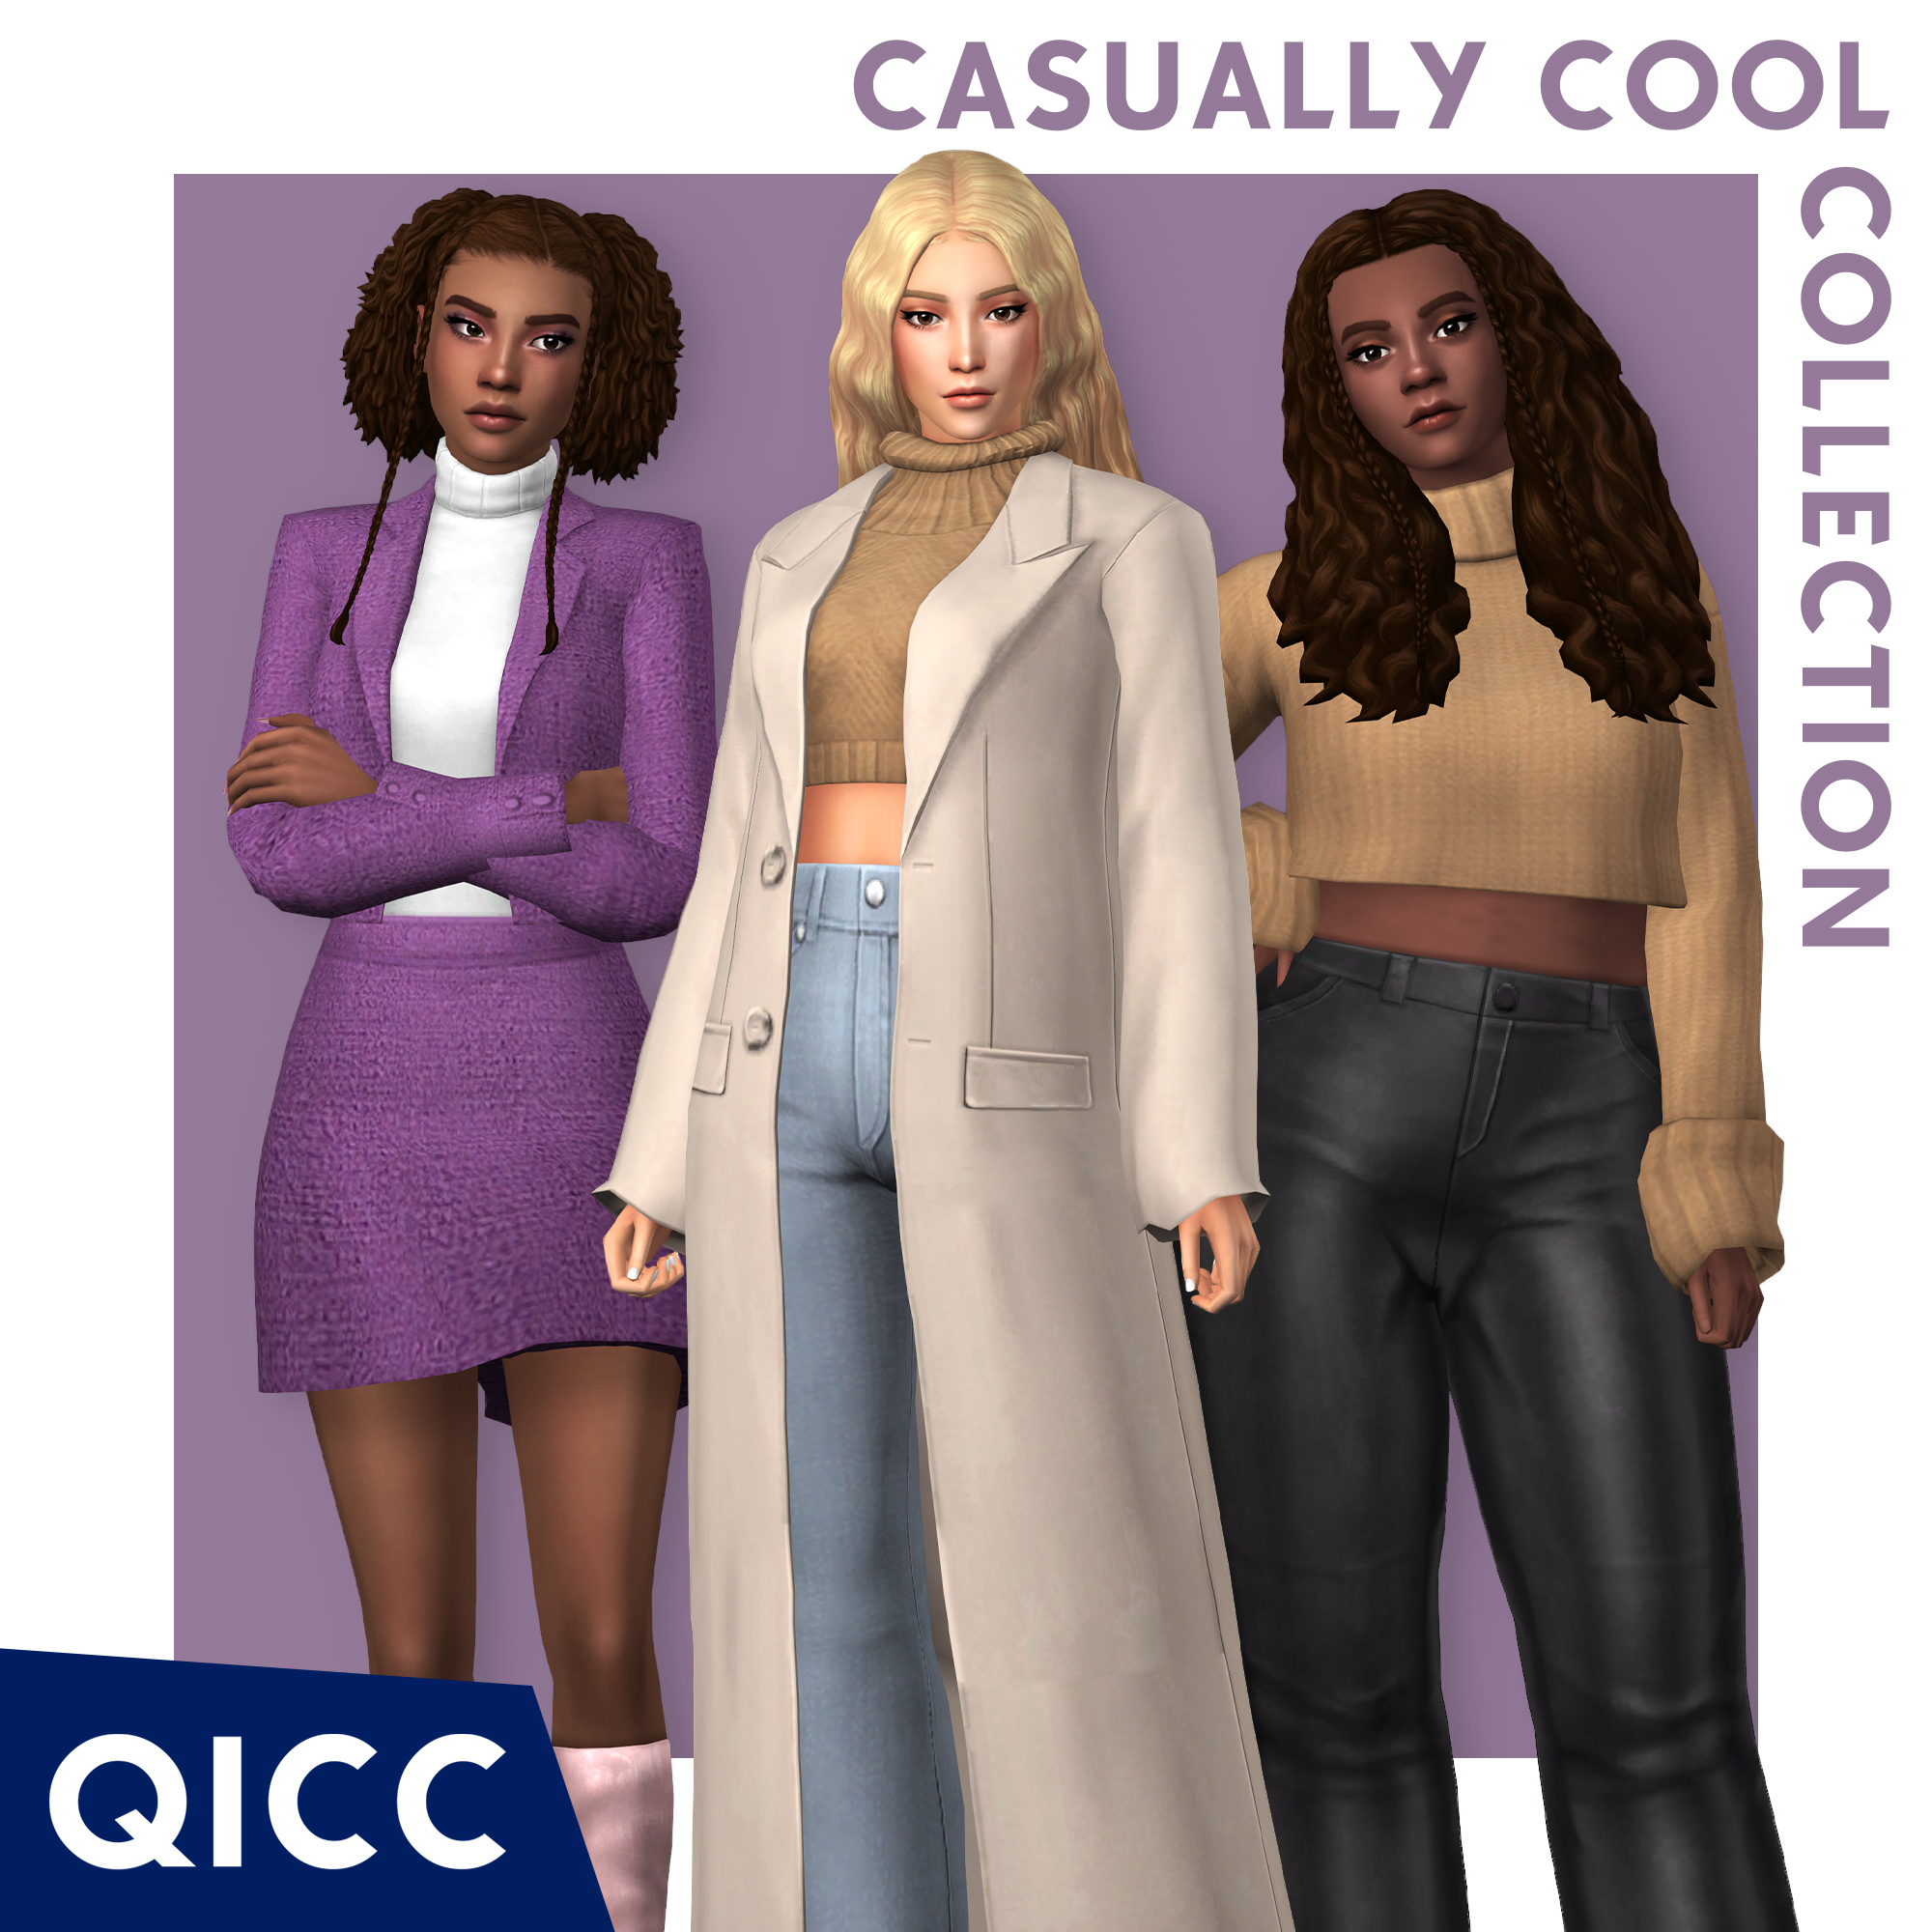 QICC - Casually Cool Collection project avatar